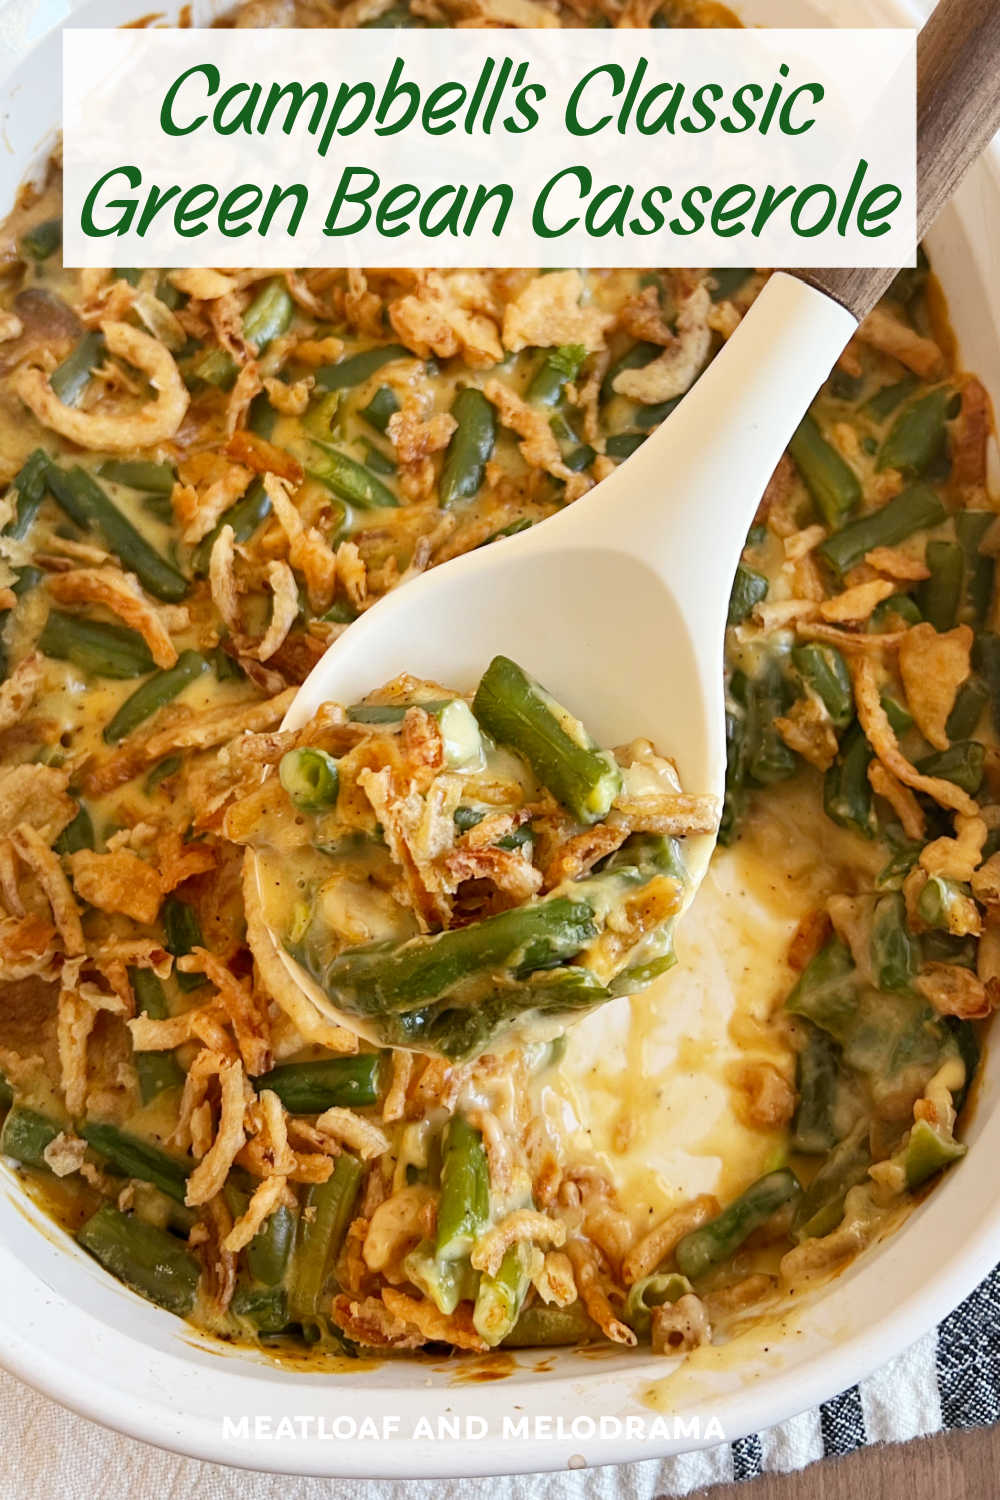 Campbell's Green Bean Casserole is a classic holiday side dish with green beans and crispy onions in a creamy sauce. This easy recipe is a family favorite for Thanksgiving dinner! via @meamel